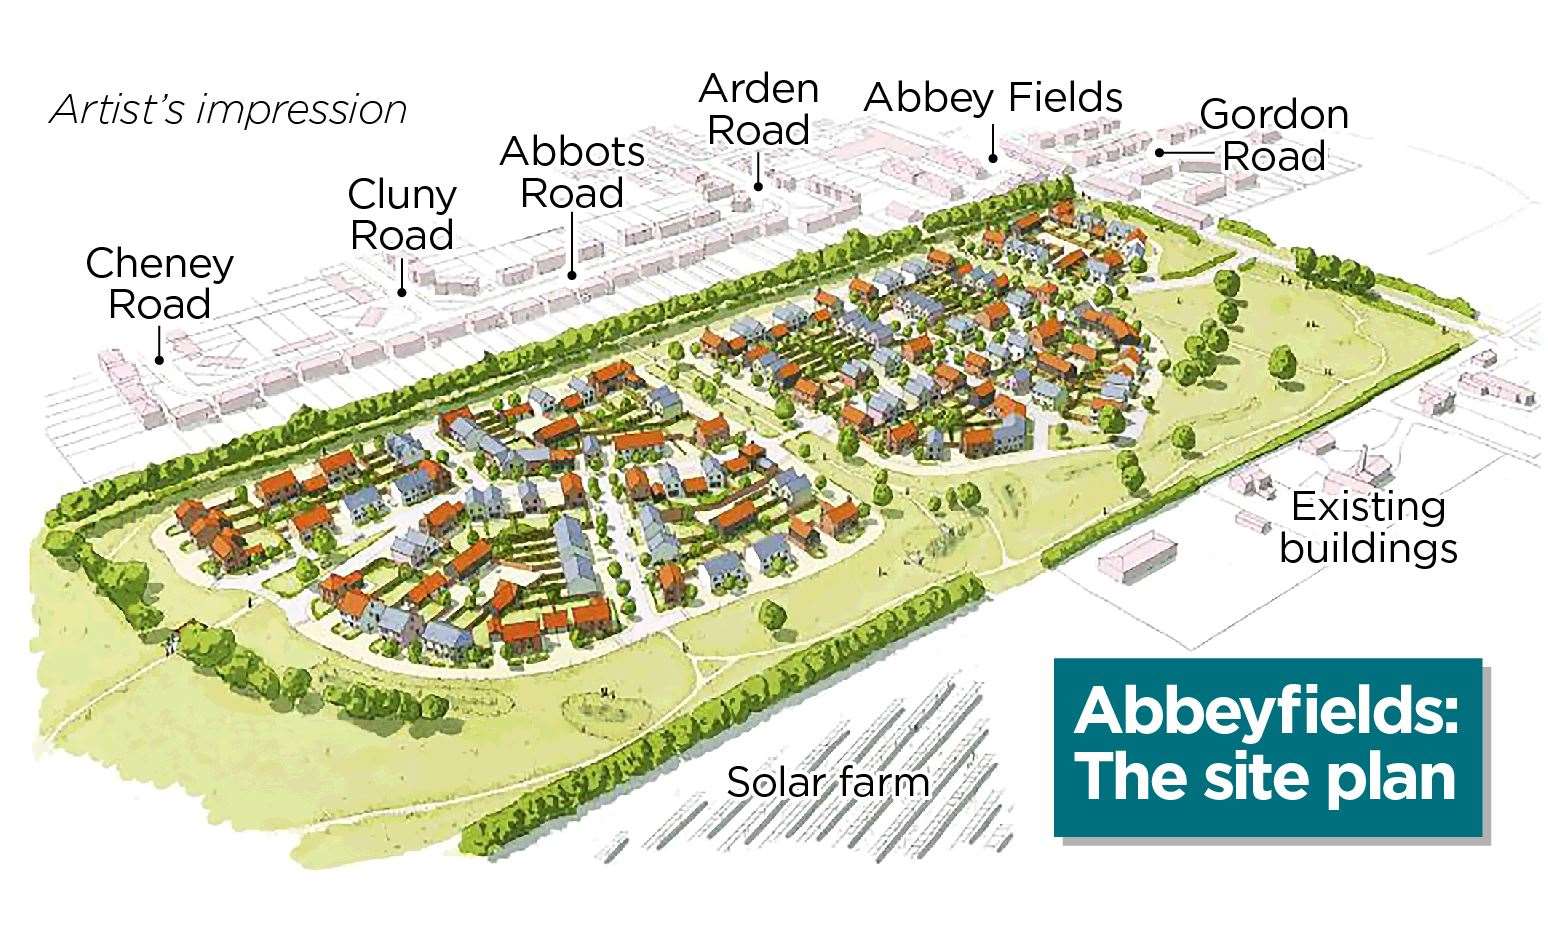 How the Abbeyfields development in Faversham could look